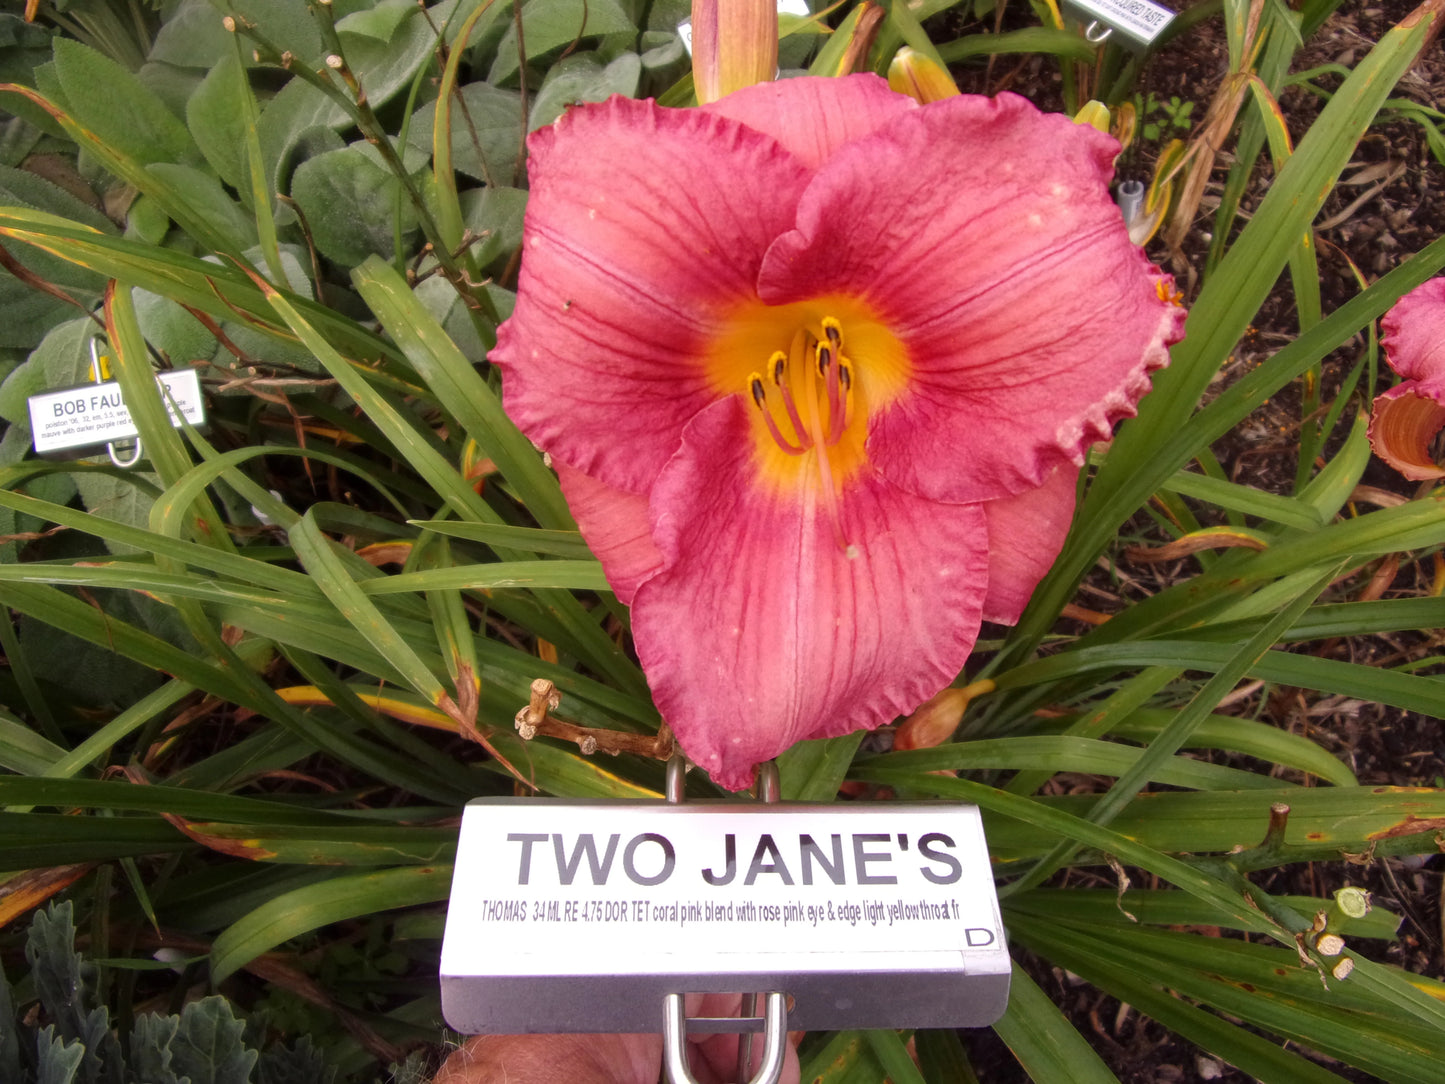 TWO JANE'S